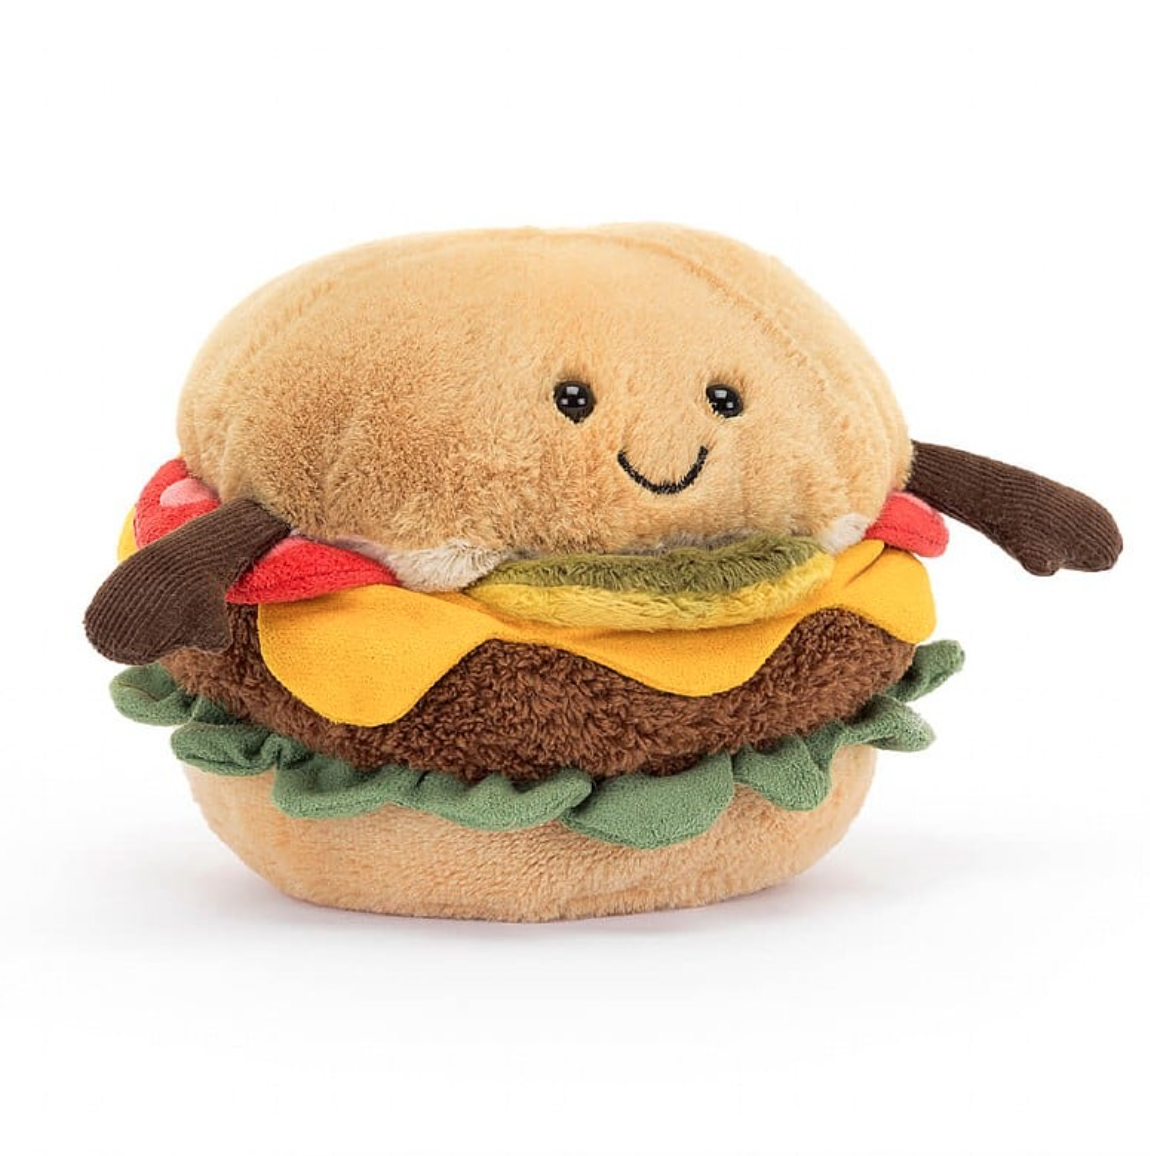 Stuffed toy styled like a smiling Amuseable Burger with layers of cheese, lettuce, and tomato, isolated on a white background. (Brand Name: Jelly Cat Inc.)